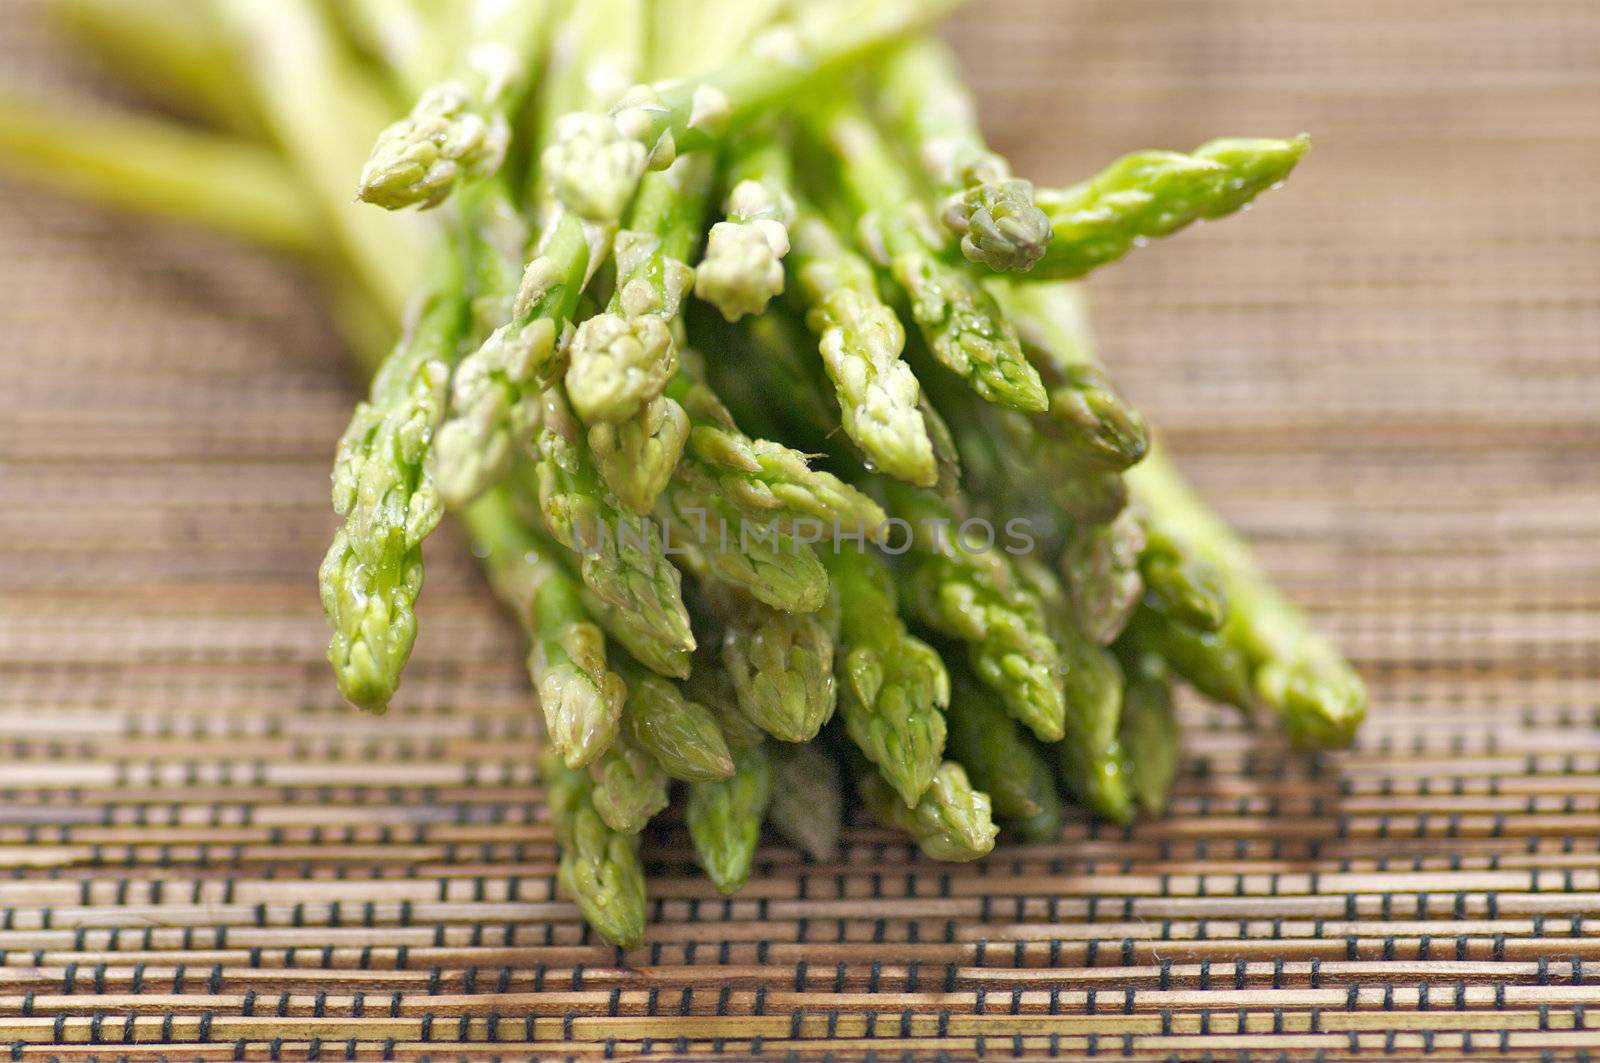 Asparagus sprouts by zhekos